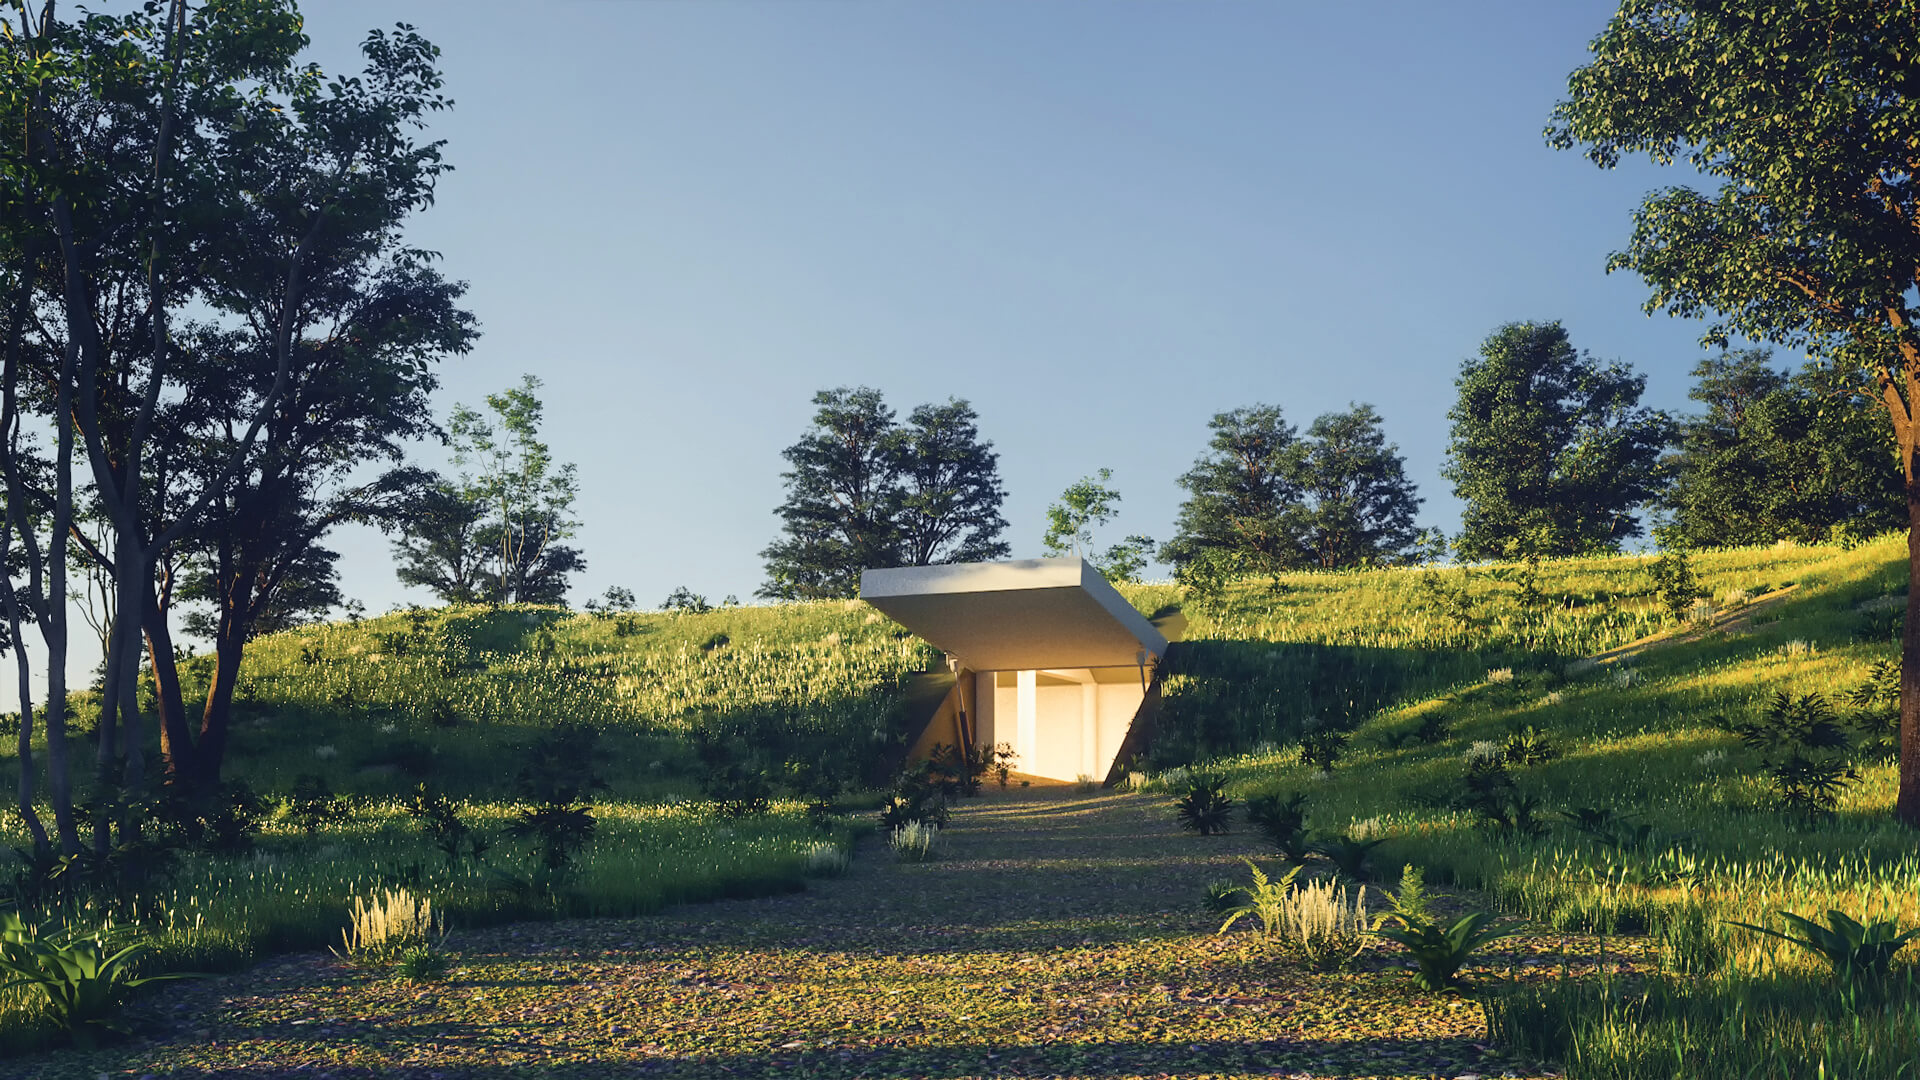 5 Personal Bunkers You Can Build, From Affordable To Bonkers Levels